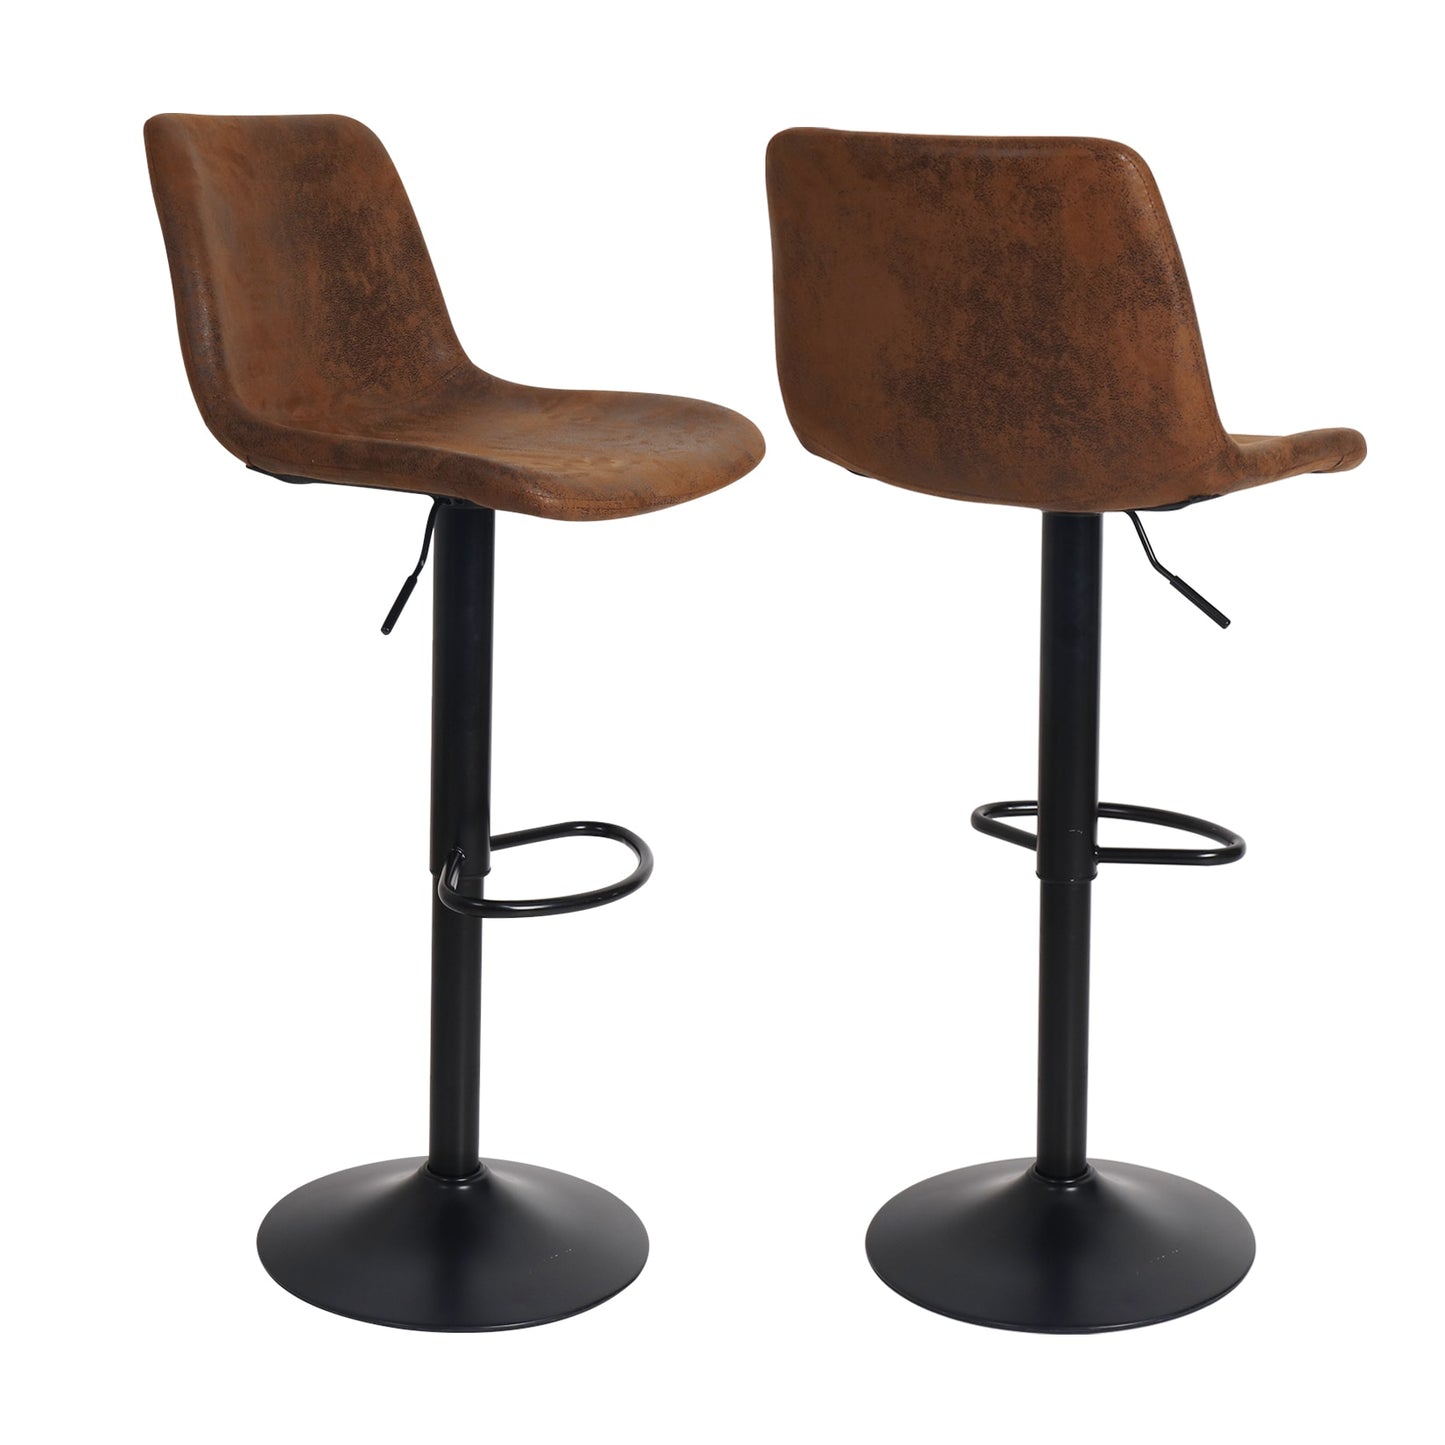 Set of 2 Bar Stools in faux faded leather